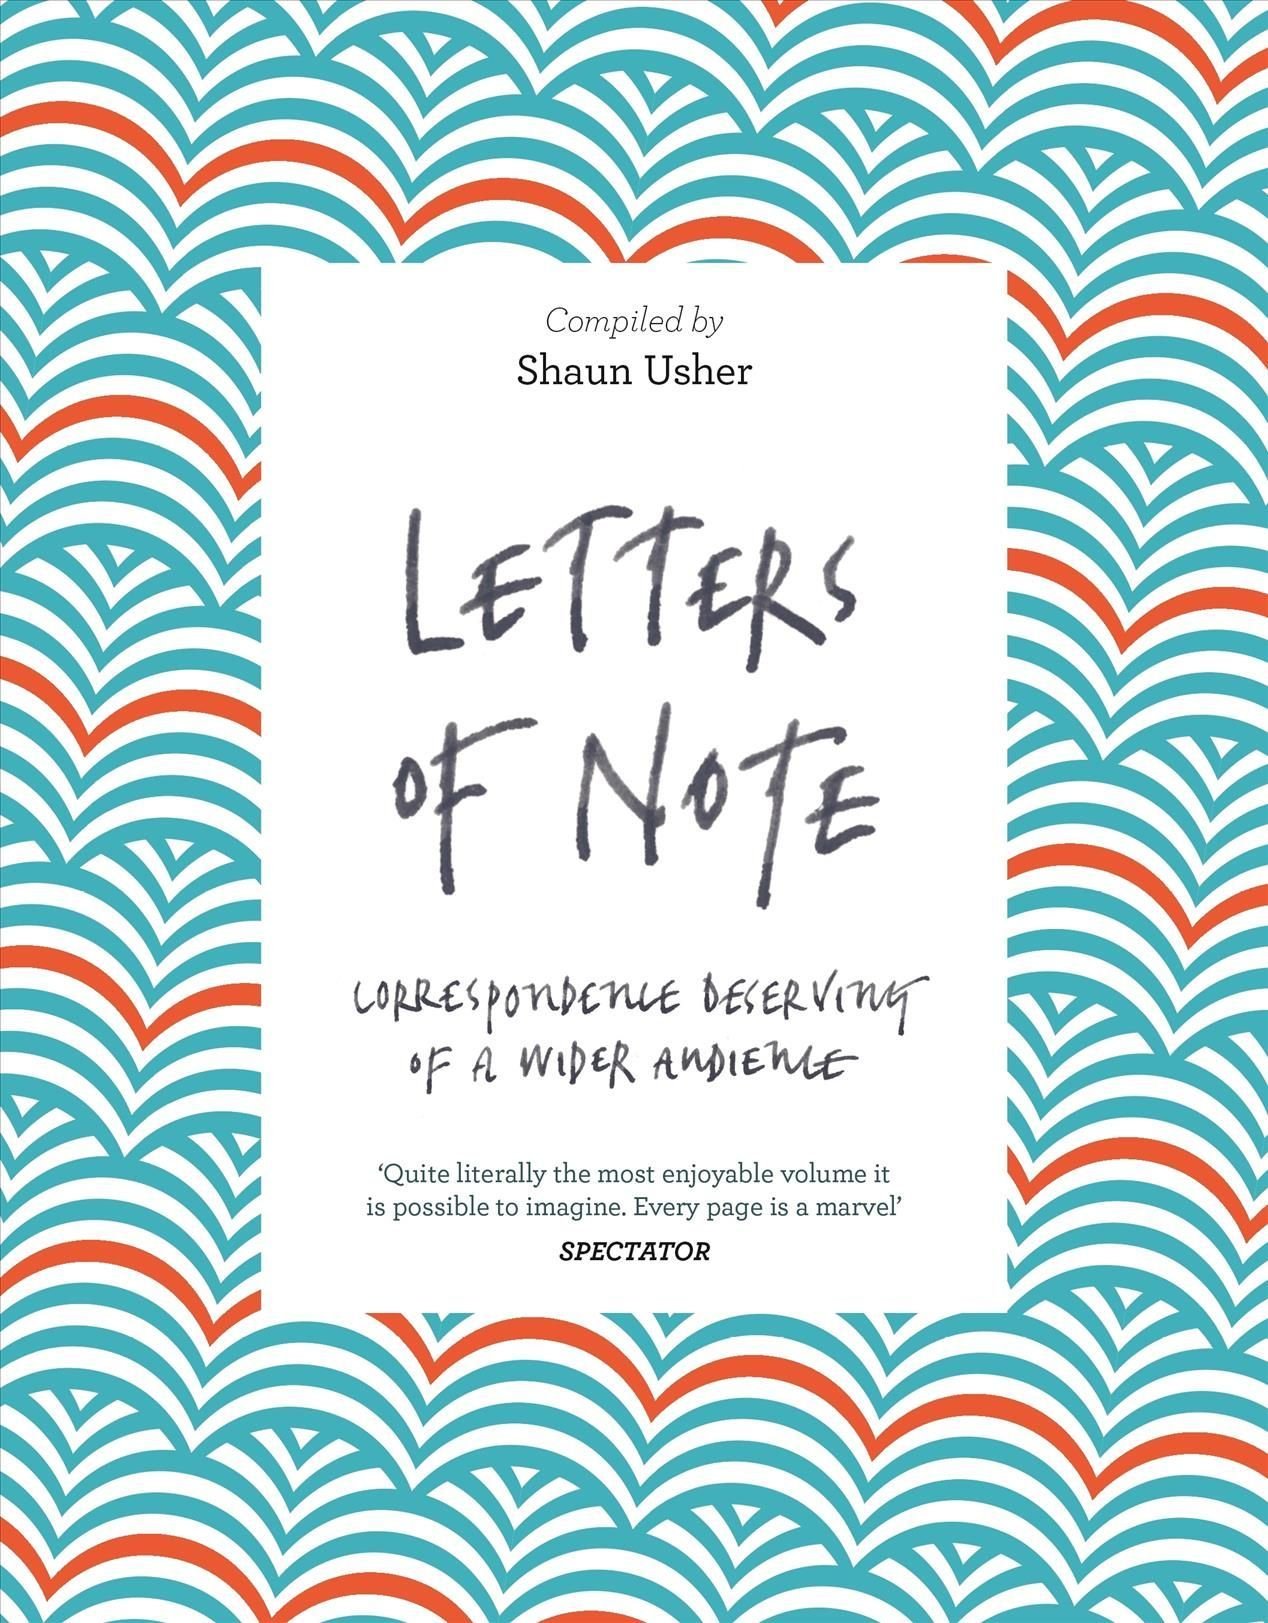 Letters of Note by Shaun Usher